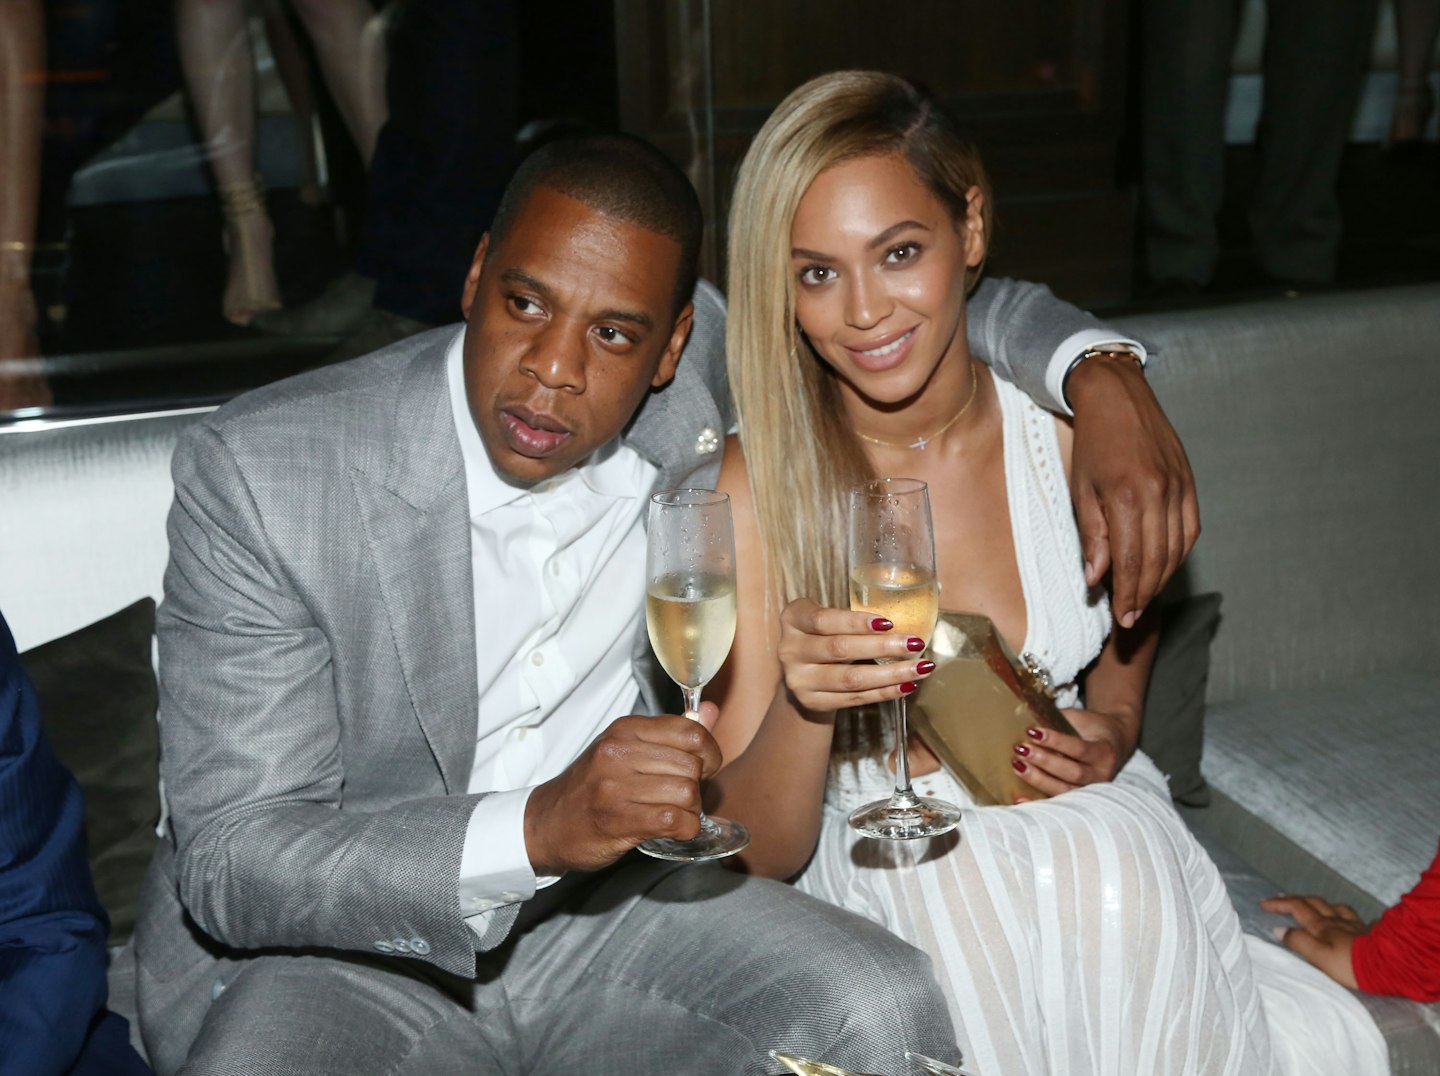 Beyonce and Jay-Z Took Champagne To The Golden Globes Prompting Lots Of Etiquette Questions